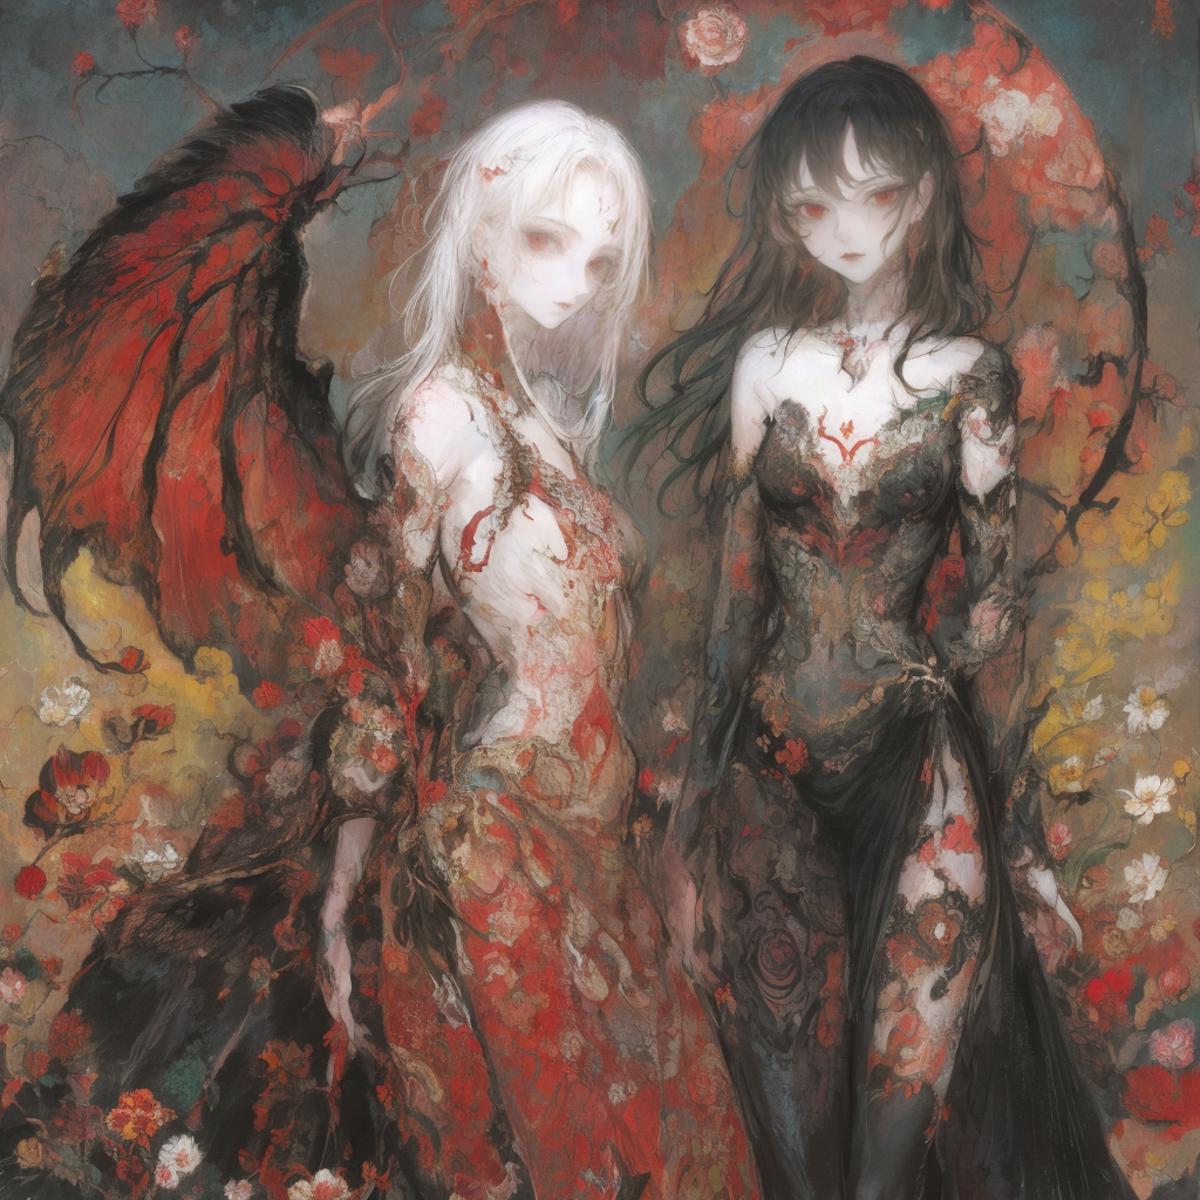 A painting of two women in fancy dresses with wings and flowers, surrounded by red and white flowers.